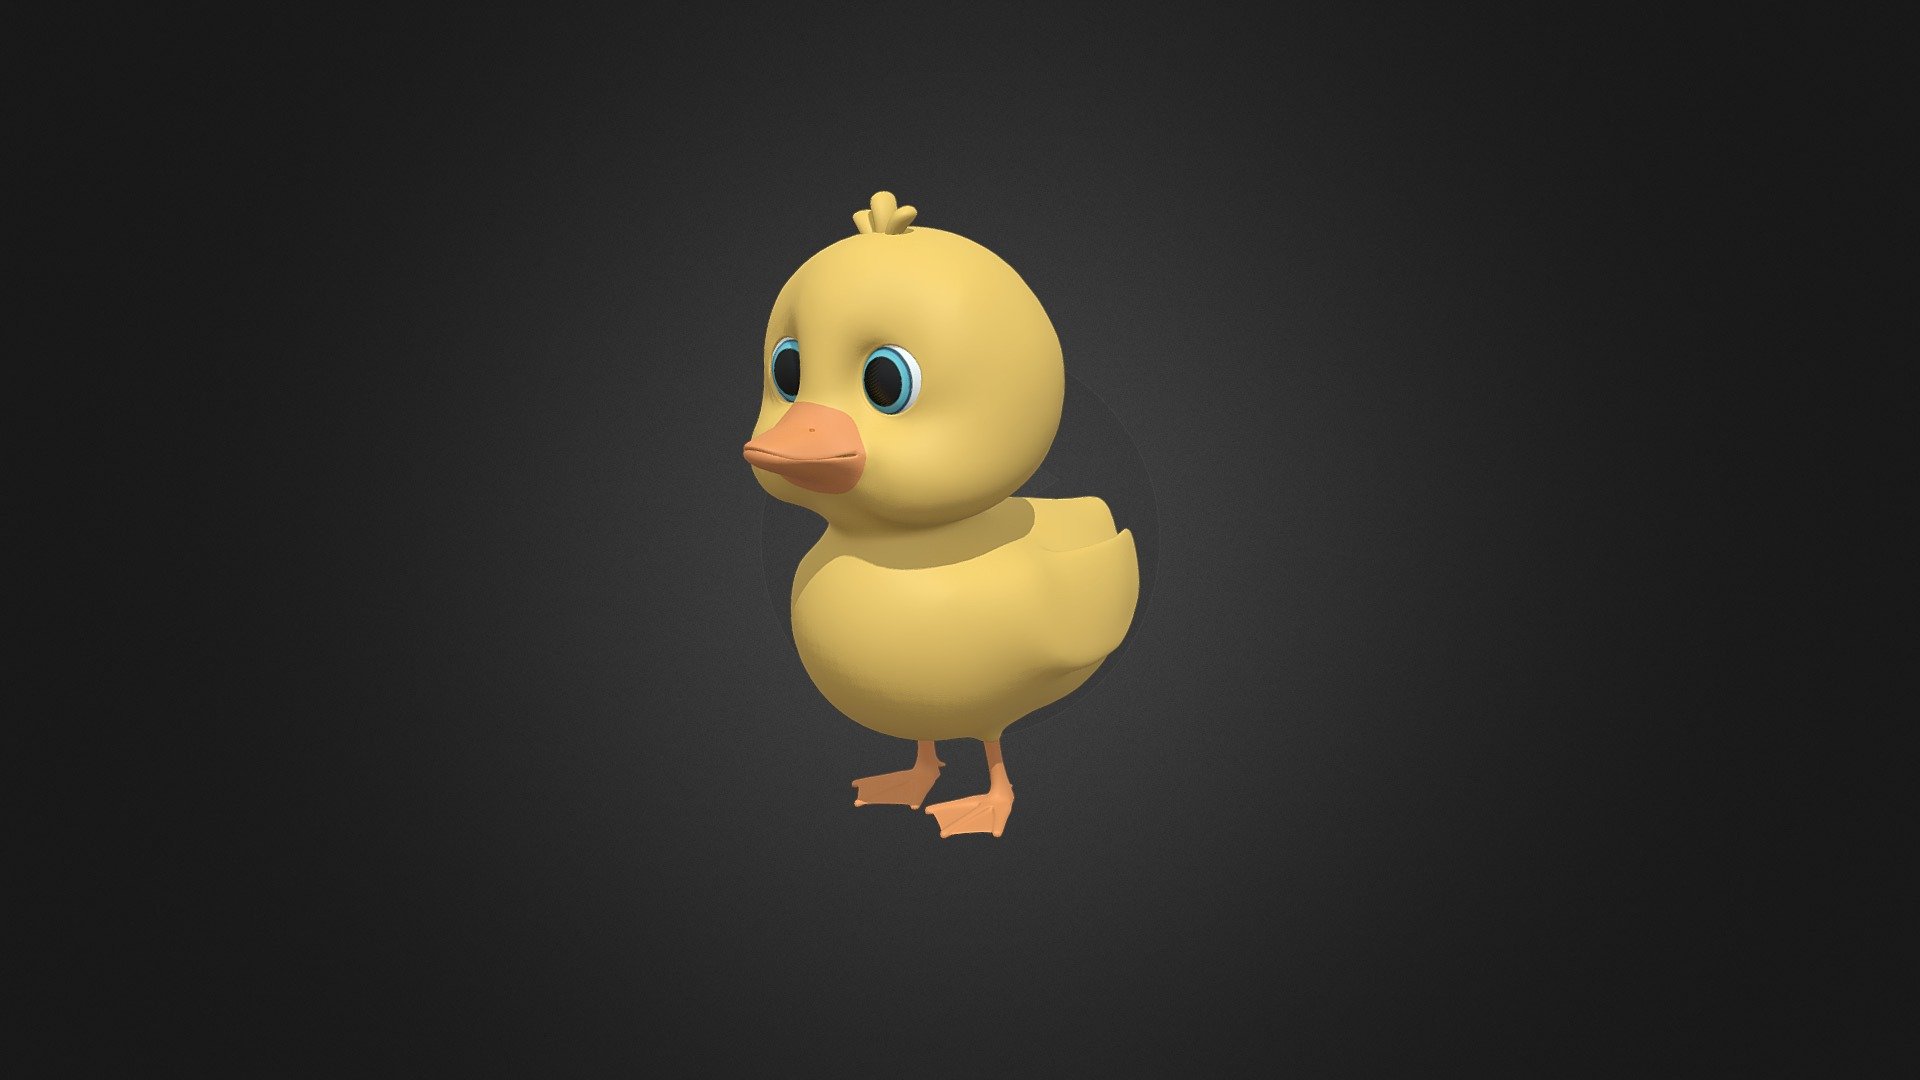 *Description




-3d model of Cartoons Duck Rig.

-This 3D model is best for use in games.

-The model is equipped with all required PBR textures.

-Model is built with great attention to details and realistic proportions with correct geometry.

-Textures are very detailed so it makes this model good enough for close-up.

*Technical details:




-Full PBR textures sets. 

-The model is divided into few manys object.

-Model is completely unwrapped.

-Model is fully textured with all materials applied.

-Pivot points are correctly placed to suit optional animation process.

-Model scaled to approximate real world size (centimeters).

-All nodes, materials and textures are appropriately named.

*Rig:




-Advanced rigging for the face and body.

**Available file formats:




-Maya files and example render scenes.(packed and regular-unpacked)

-Maya (.ma)

-Autodesk FBX (.fbx)

*Additional Info:




-This model is not intended for 3D printing.
 - Asset - Cartoons - Animal - Duck Rigged - Buy Royalty Free 3D model by InCom Studio (@incomstudio) 3d model